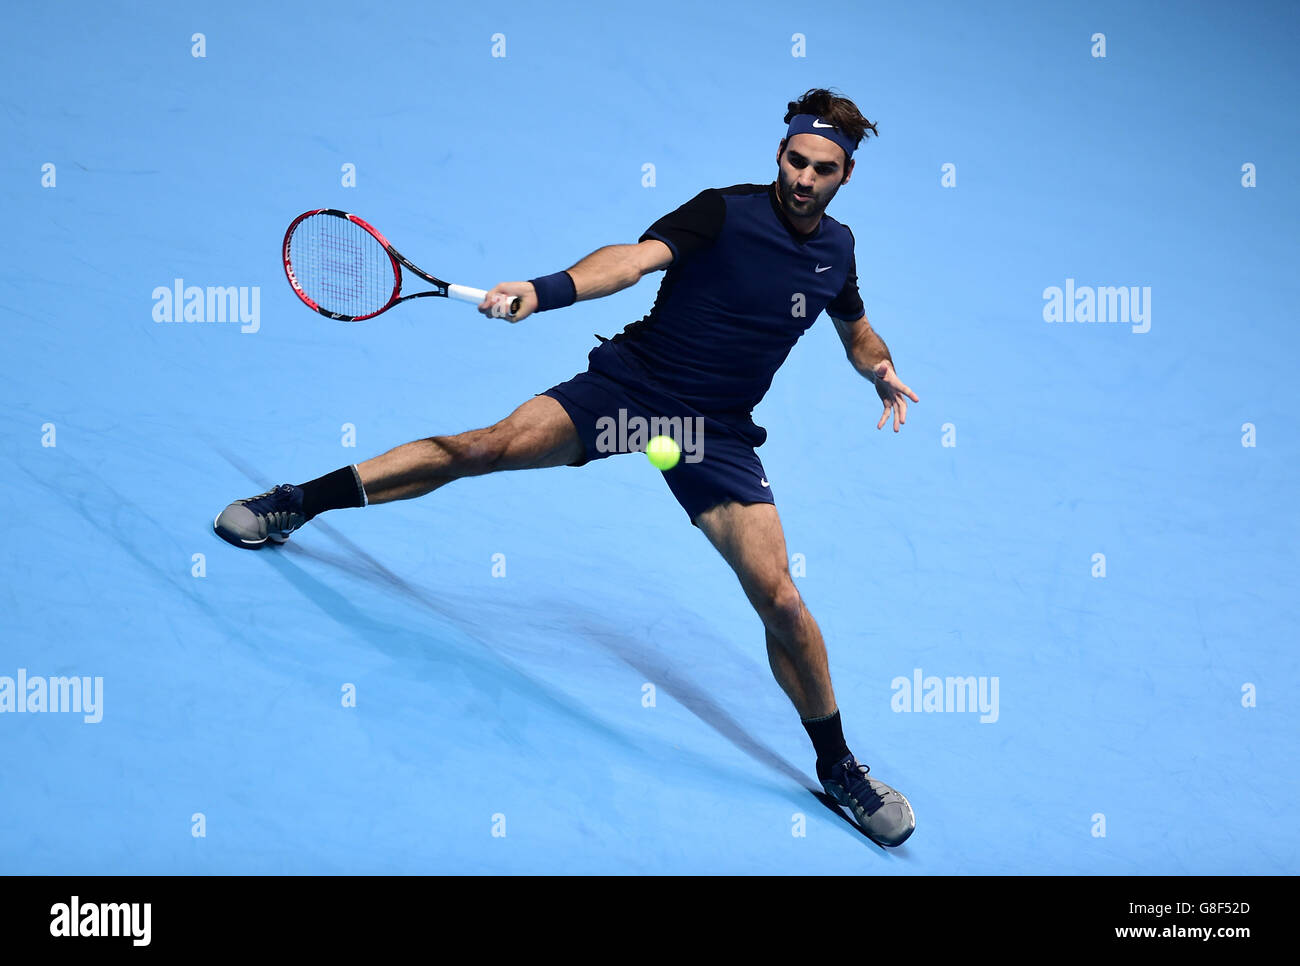 Switzerland's Roger Federer during the Final of the ATP World Tour Finals at the O2 Arena, London. PRESS ASSSOCIATION Photo. Picture date: Sunday November 22, 2015. See PA story TENNIS London. Photo credit should read: Adam Davy/PA Wire. RESTRICTIONS: , No commercial use without prior permission, please contact PA Images for further information: Tel: +44 (0) 115 8447447. Stock Photo